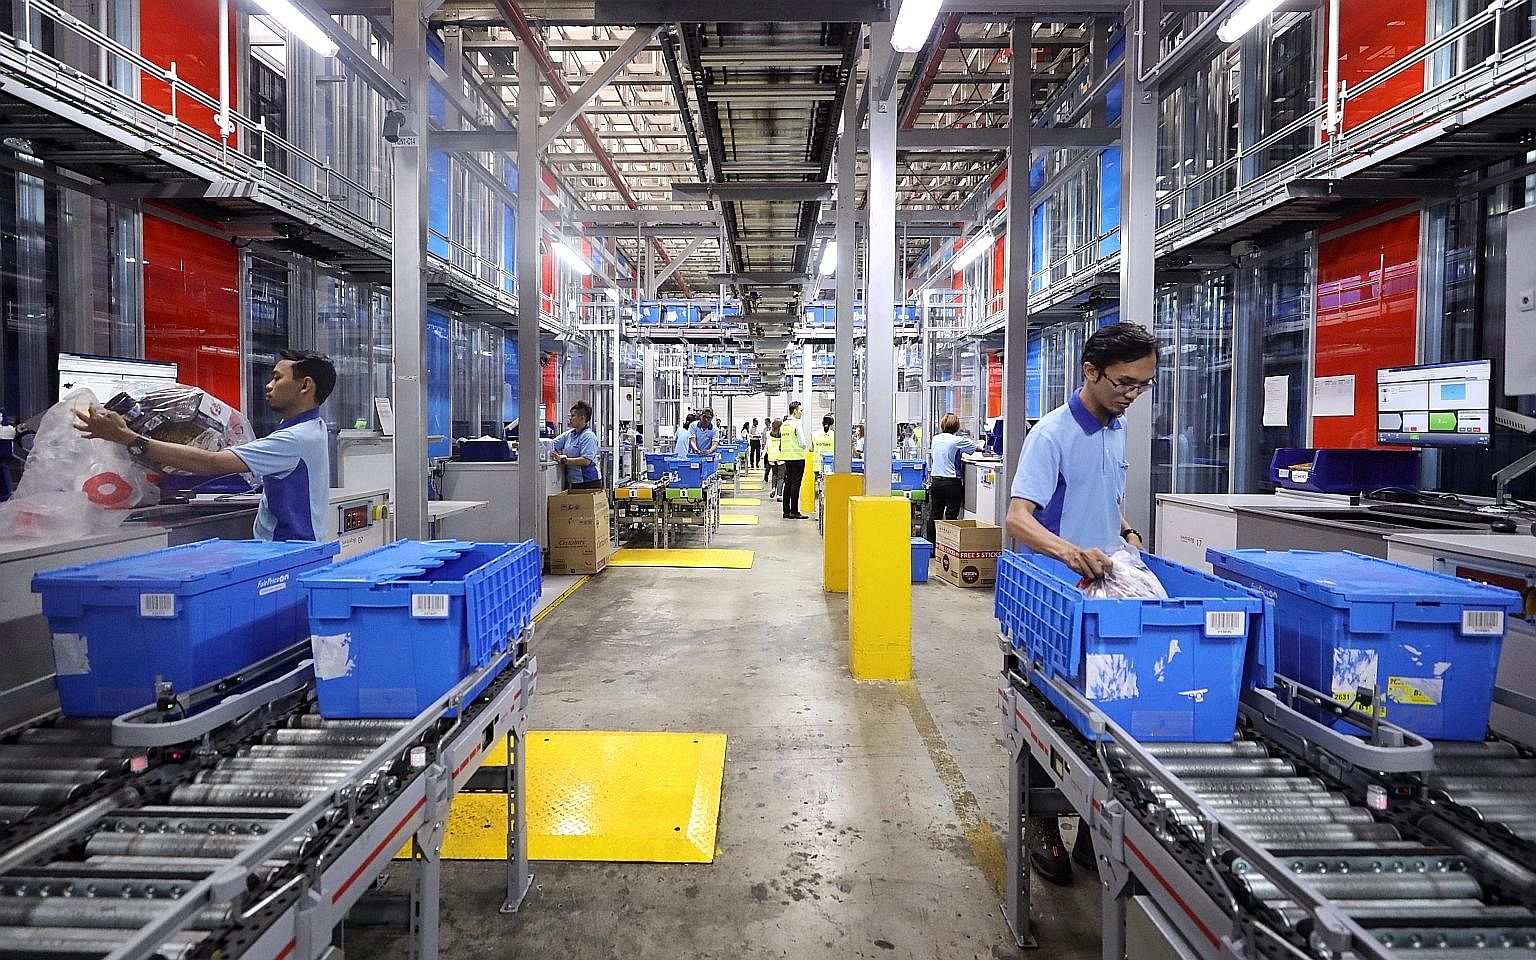 Pickers at FairPrice distribution centre retrieving ordered items from storage bins brought to them by AutoStore robots. FairPrice's training has helped workers quickly pick up new skills to make use of the new systems, and their work environment is 